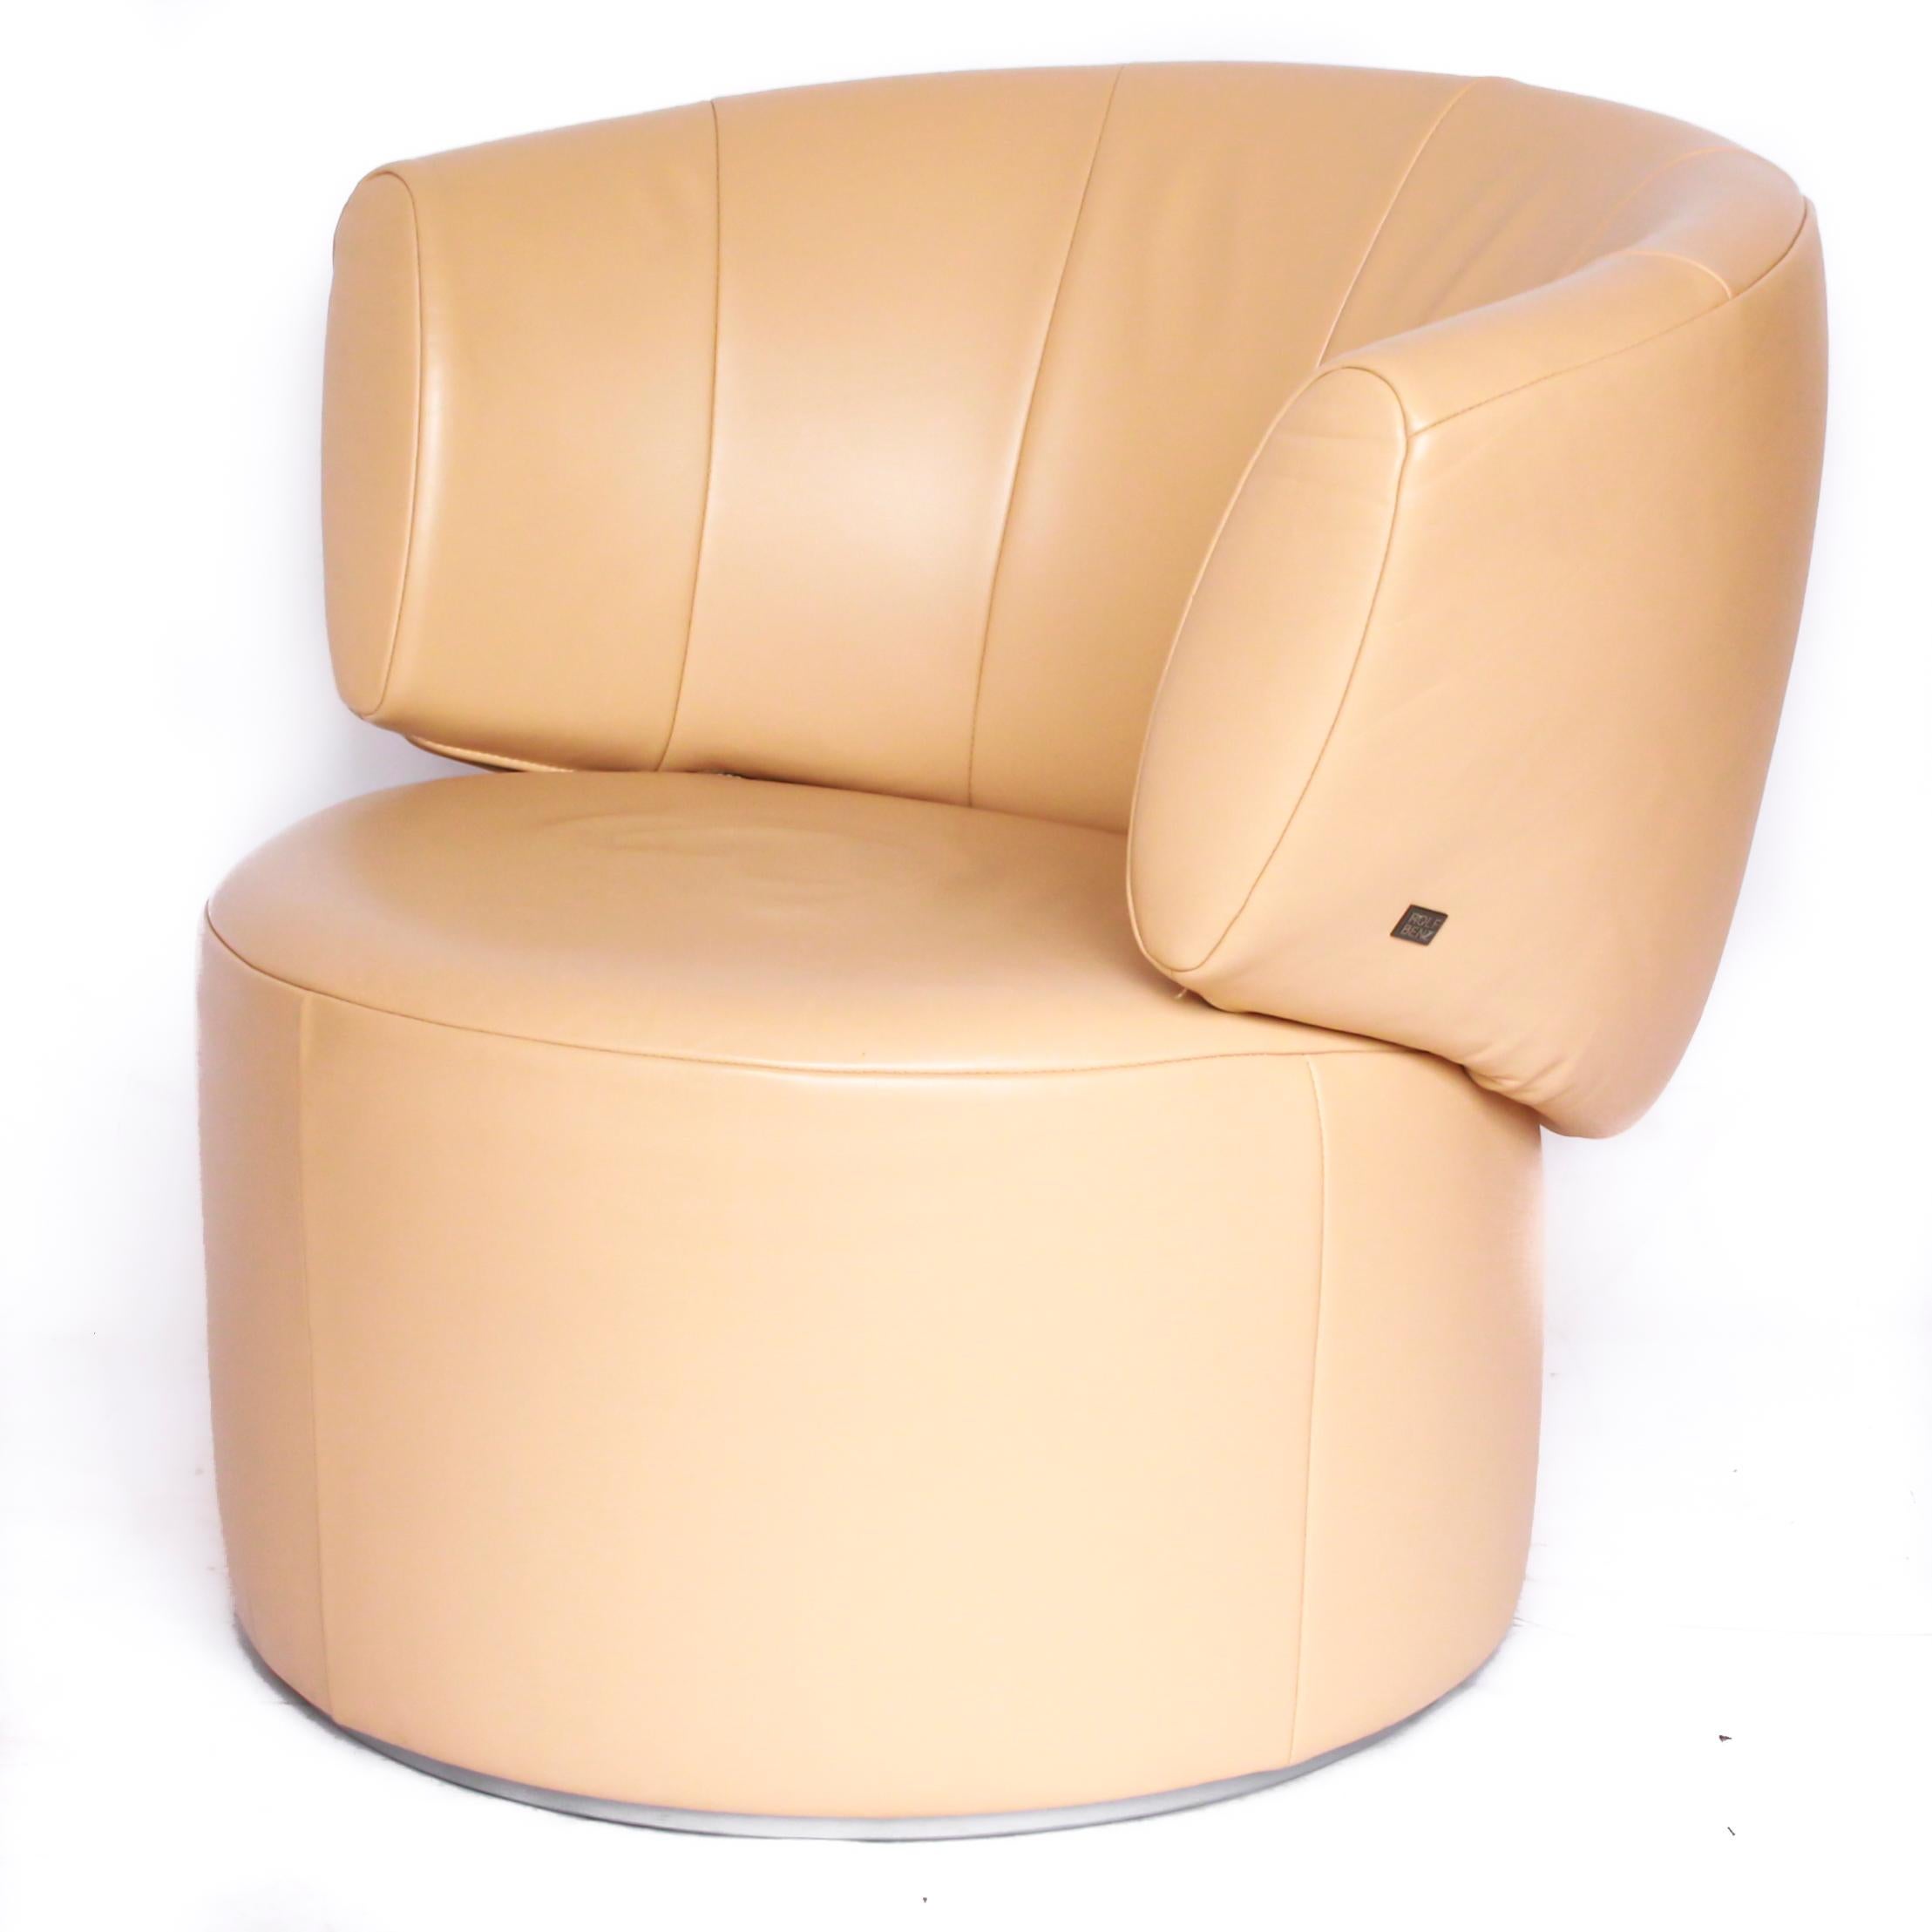 Pair of Rolf Benz 684 Armchairs Cream Leather Wooden Base Swivel Movement 1